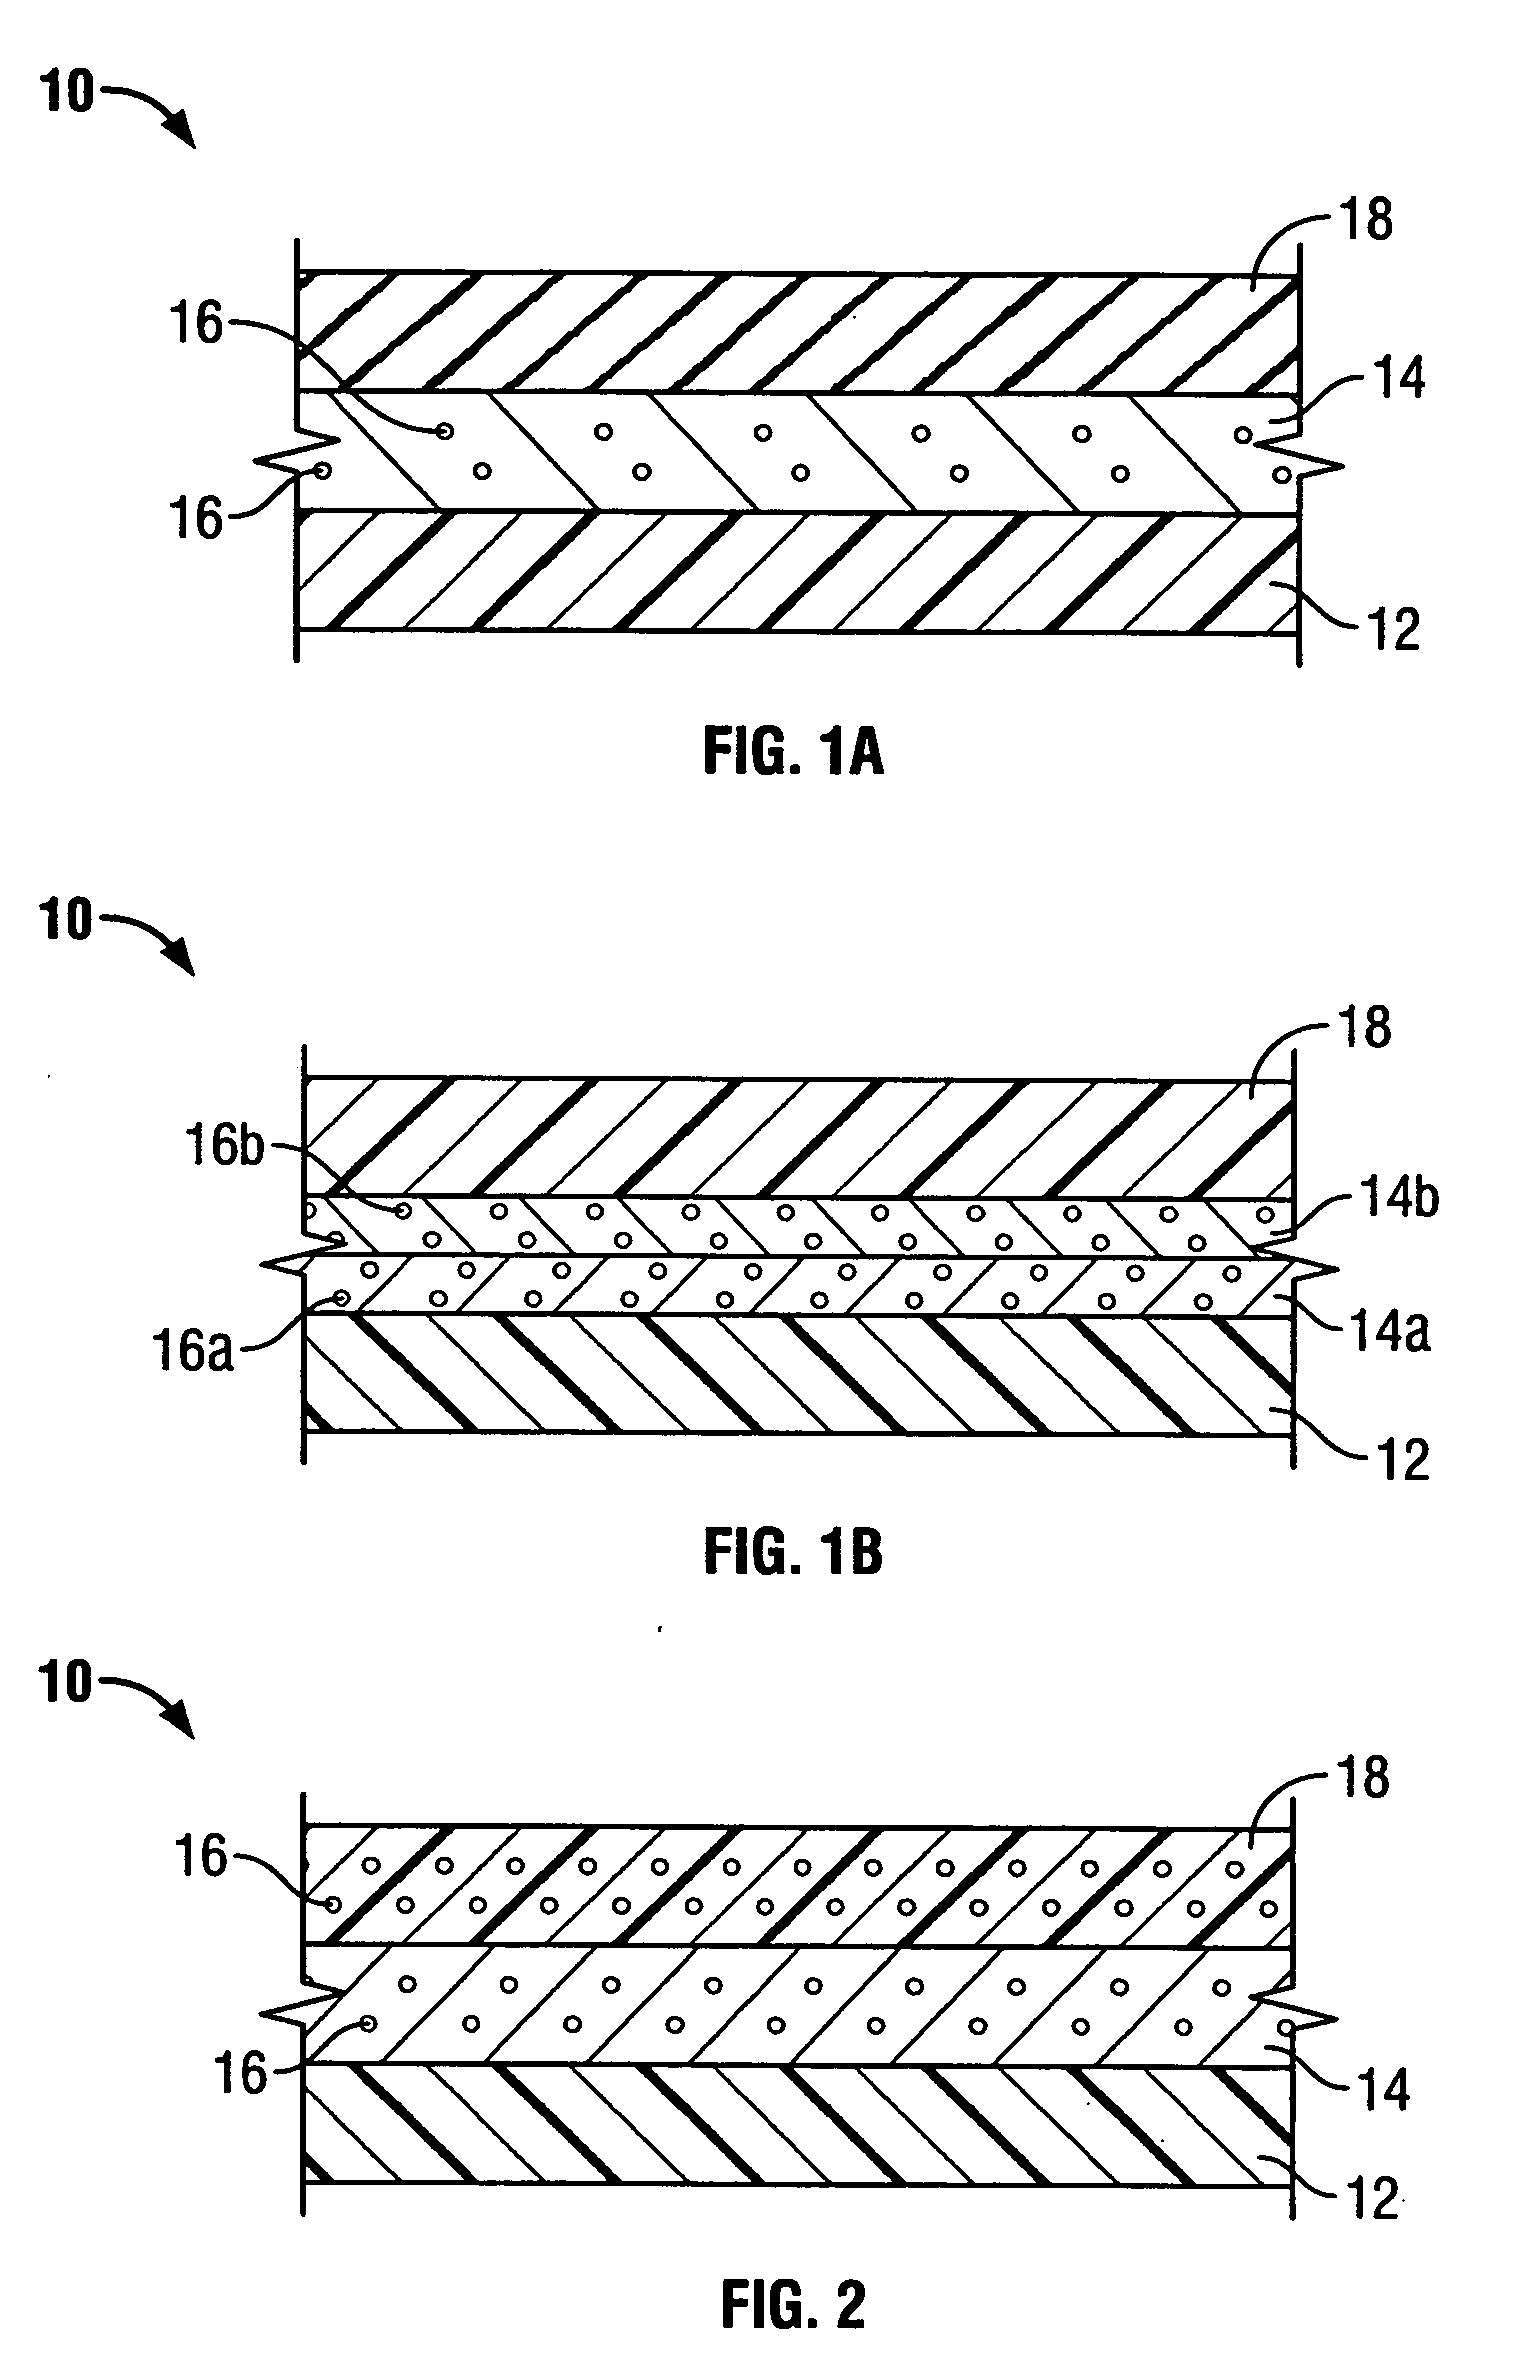 Composite vascular graft including bioactive agent coating and biodegradable sheath